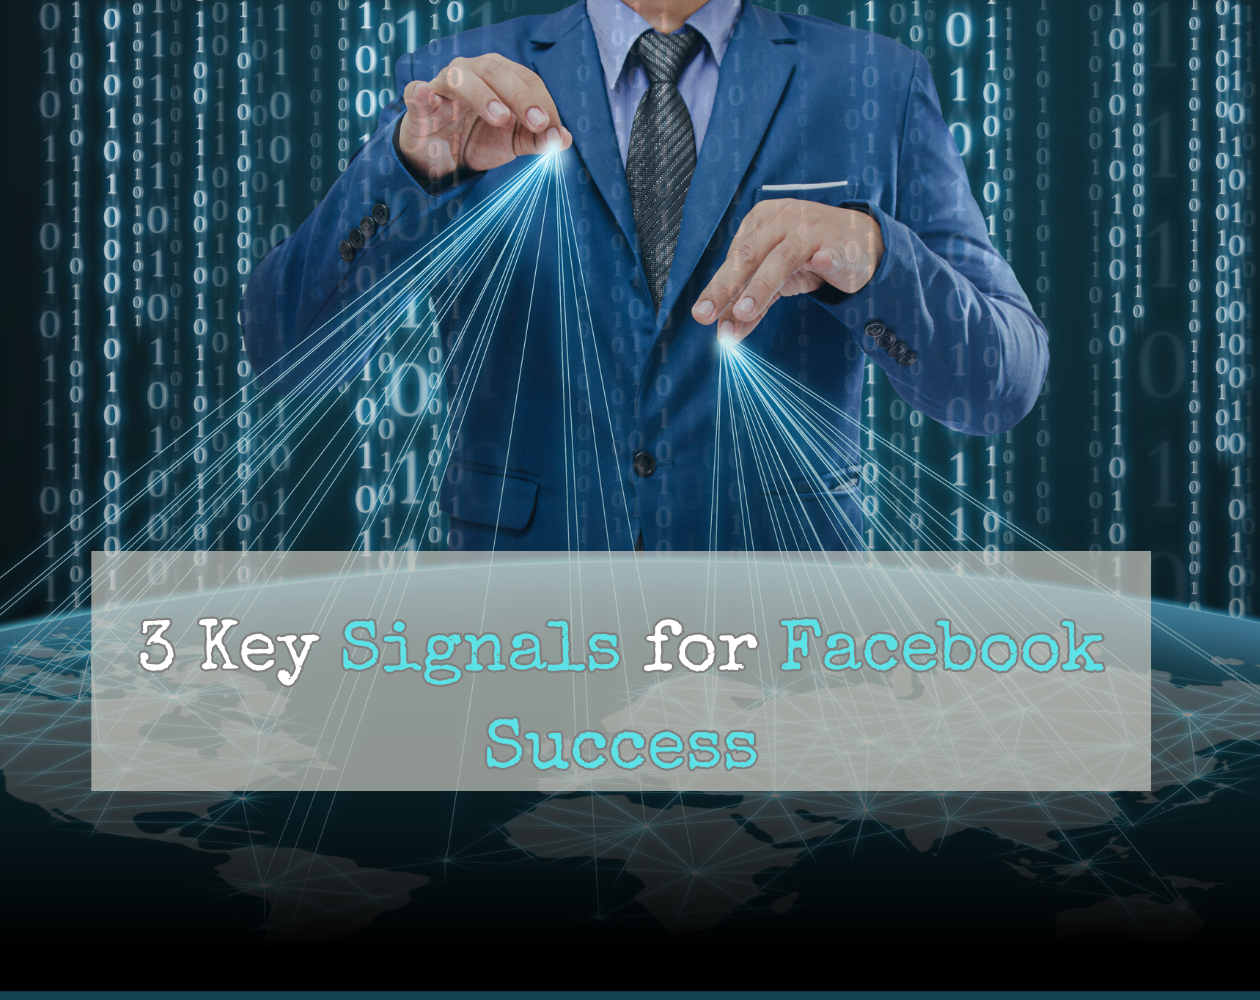 Master Your Feed: 3 Key Signals for Facebook Success